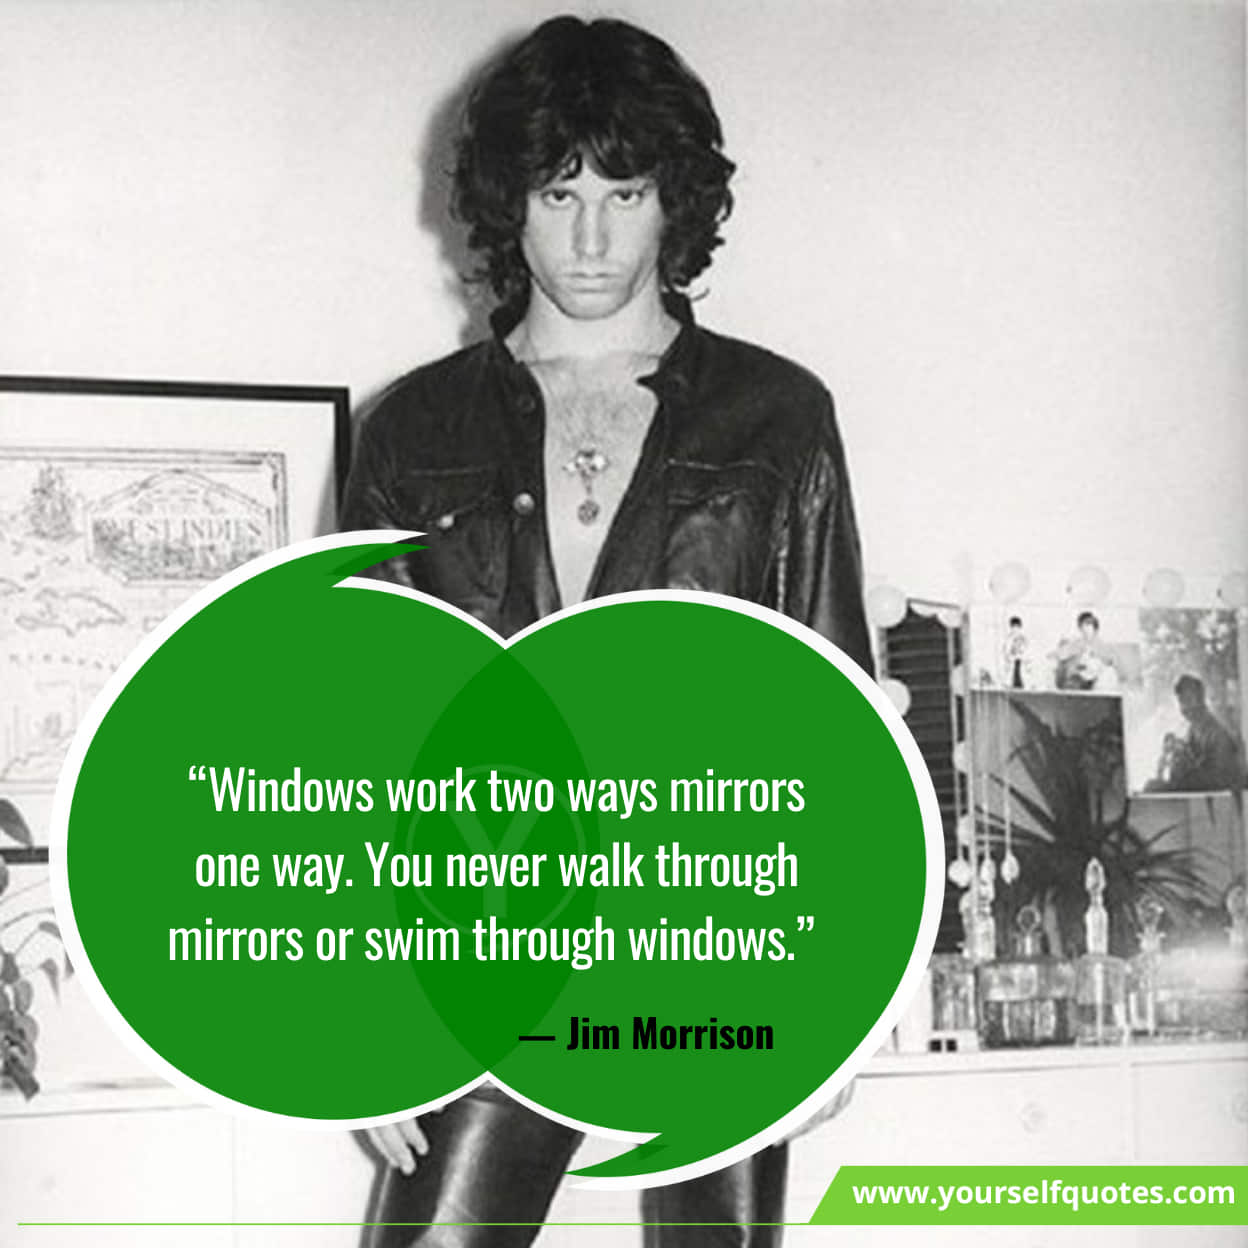 Jim Morrison's artistic expression and creativity